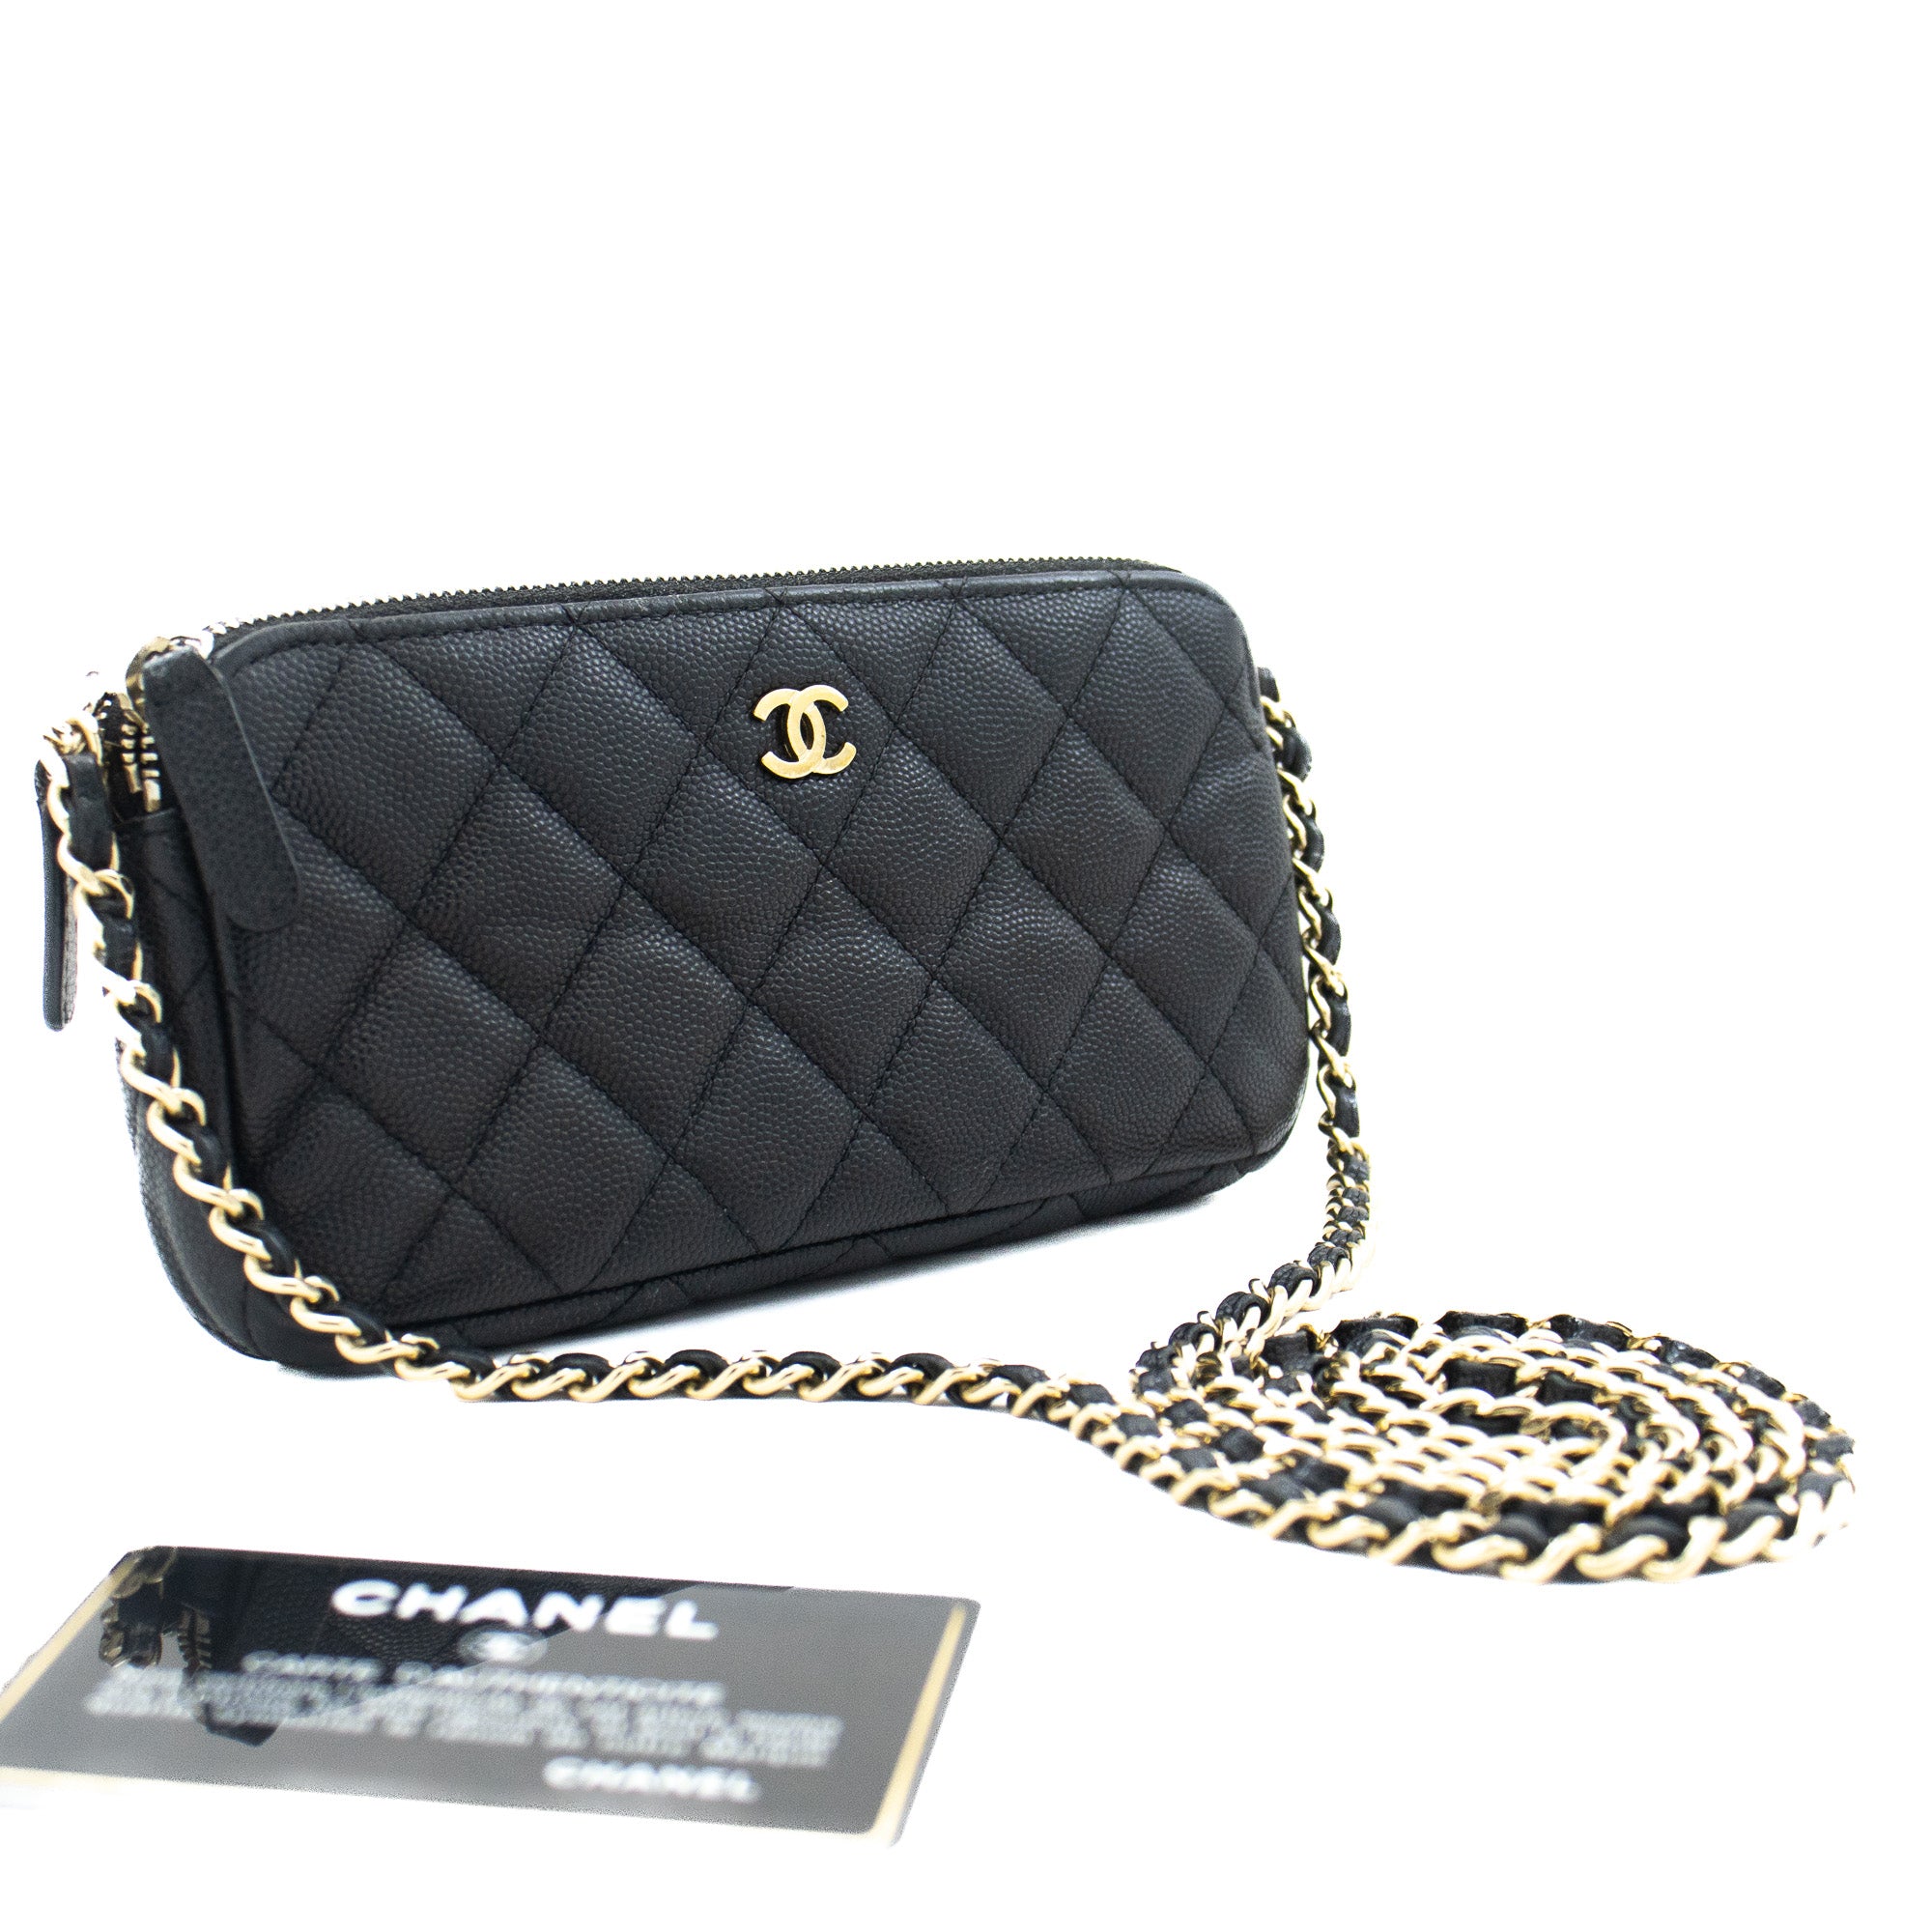 CHANEL Black Classic WOC Wallet On Chain Shoulder Bag Lambskin at